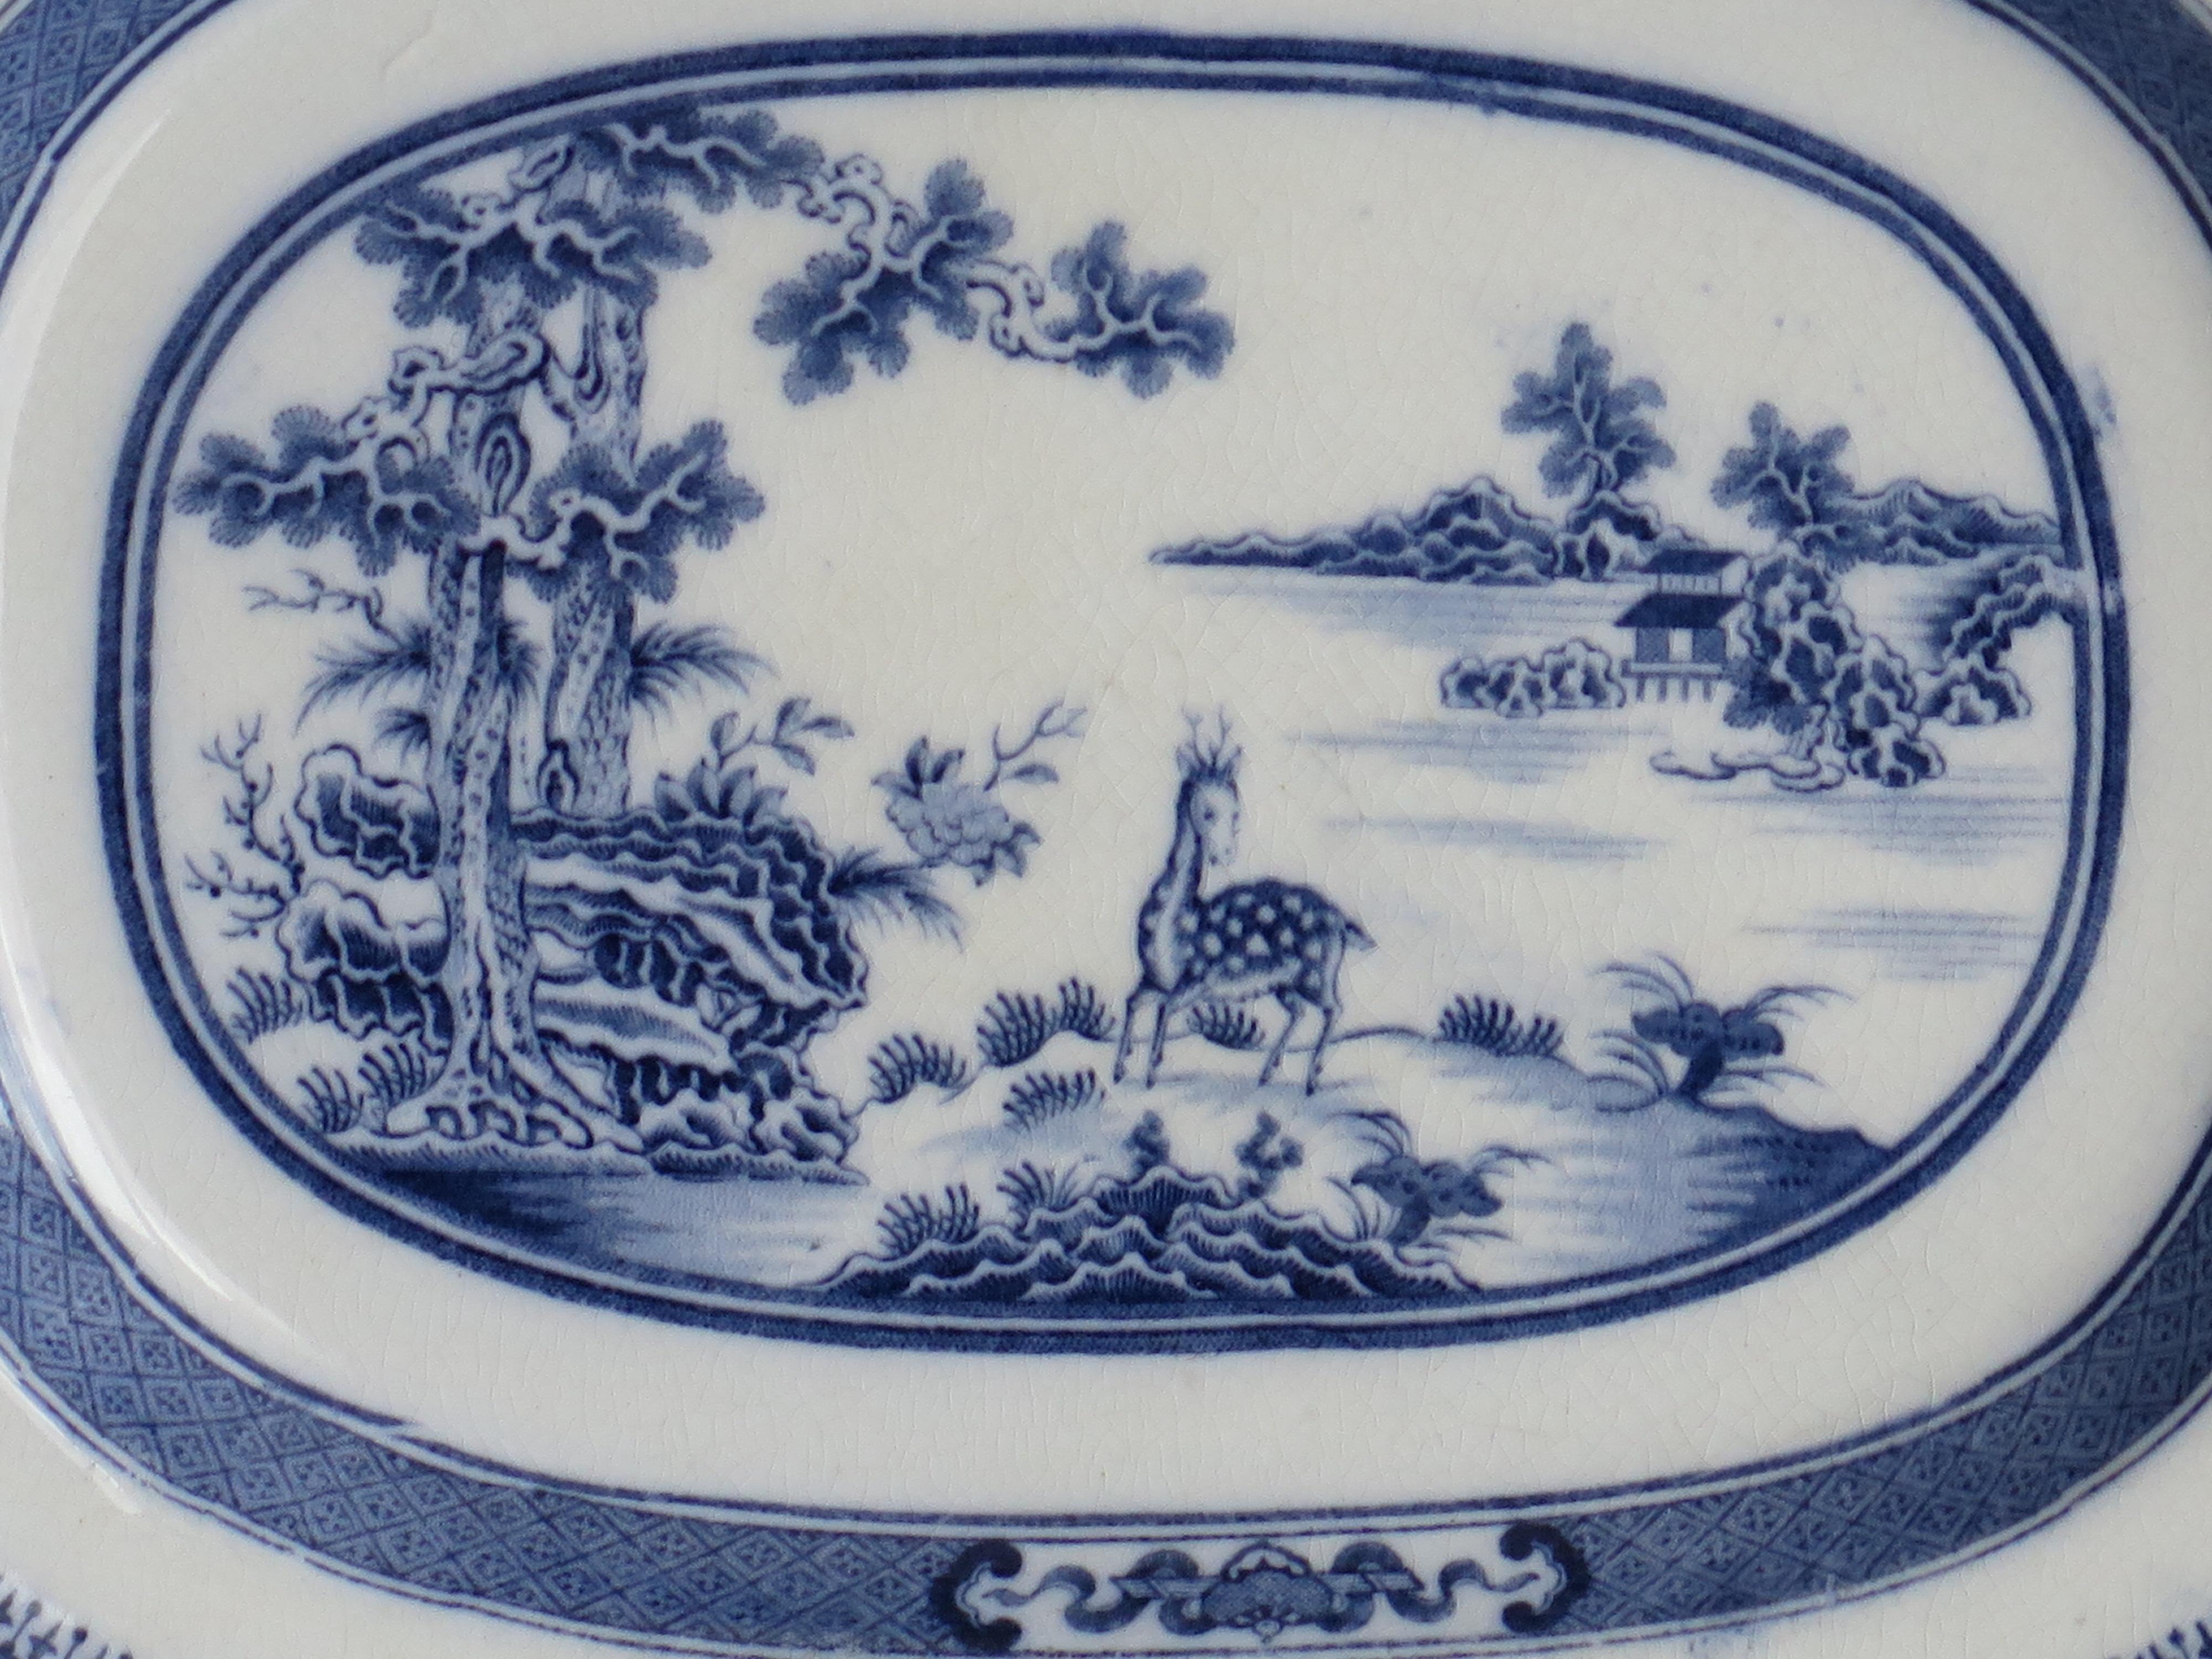 Glazed Early 19th C. Pearlware Blue & White Dish or Plate Chital Deer India Ptn, Ca 1820